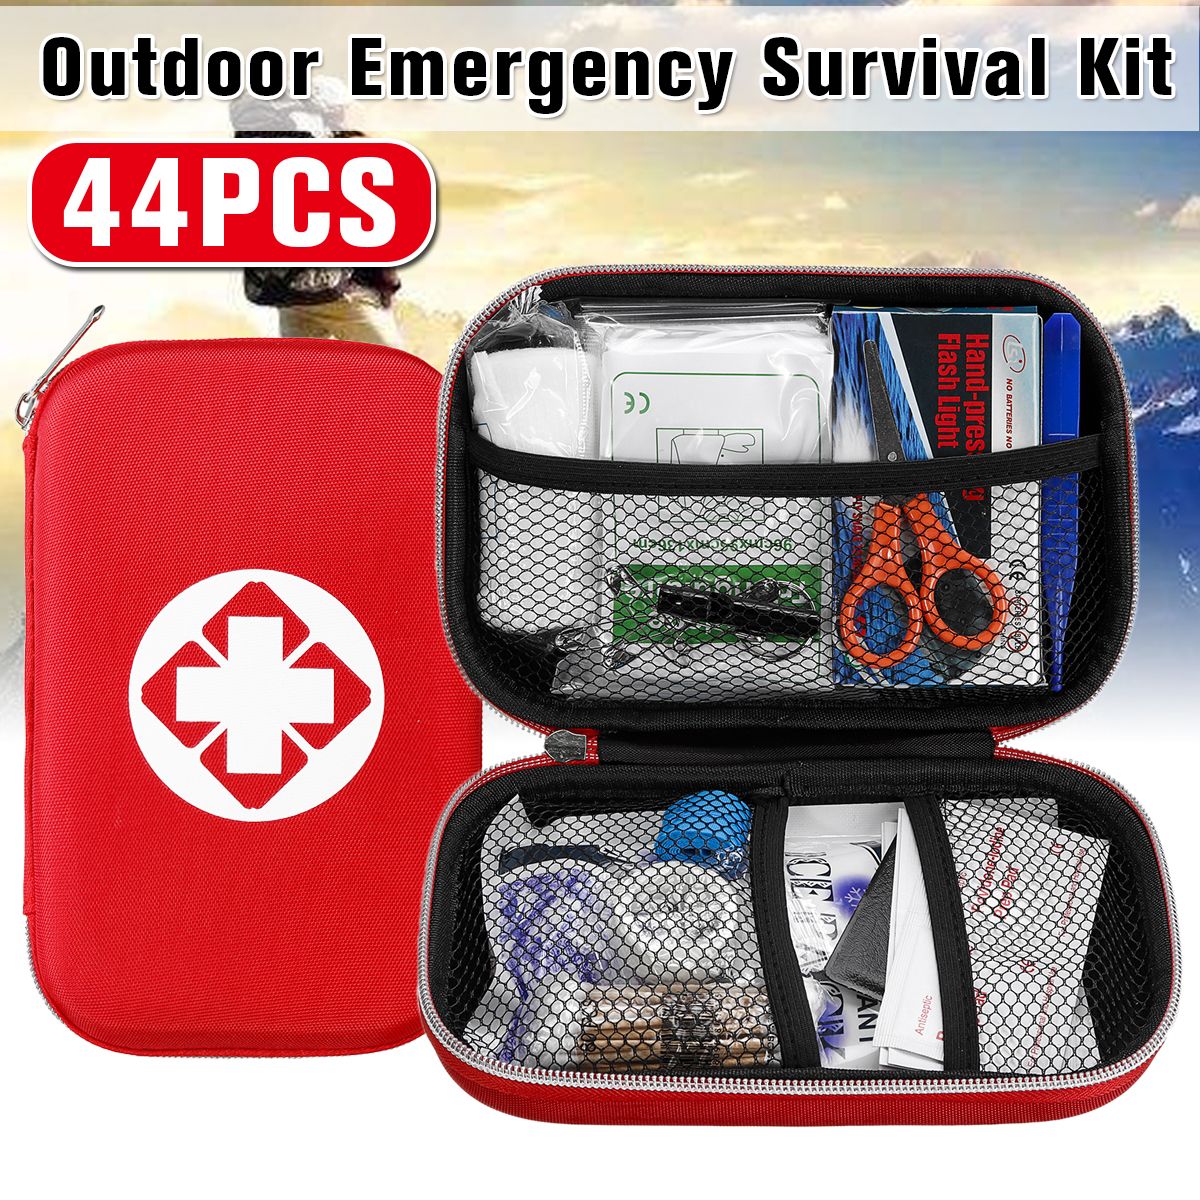 44Pcs-18-kinds-Outdoor-Emergency-Survival-Kit-Gear-for-Home-Office-Car-Boat-Camping-Hiking-First-Aid-1568990